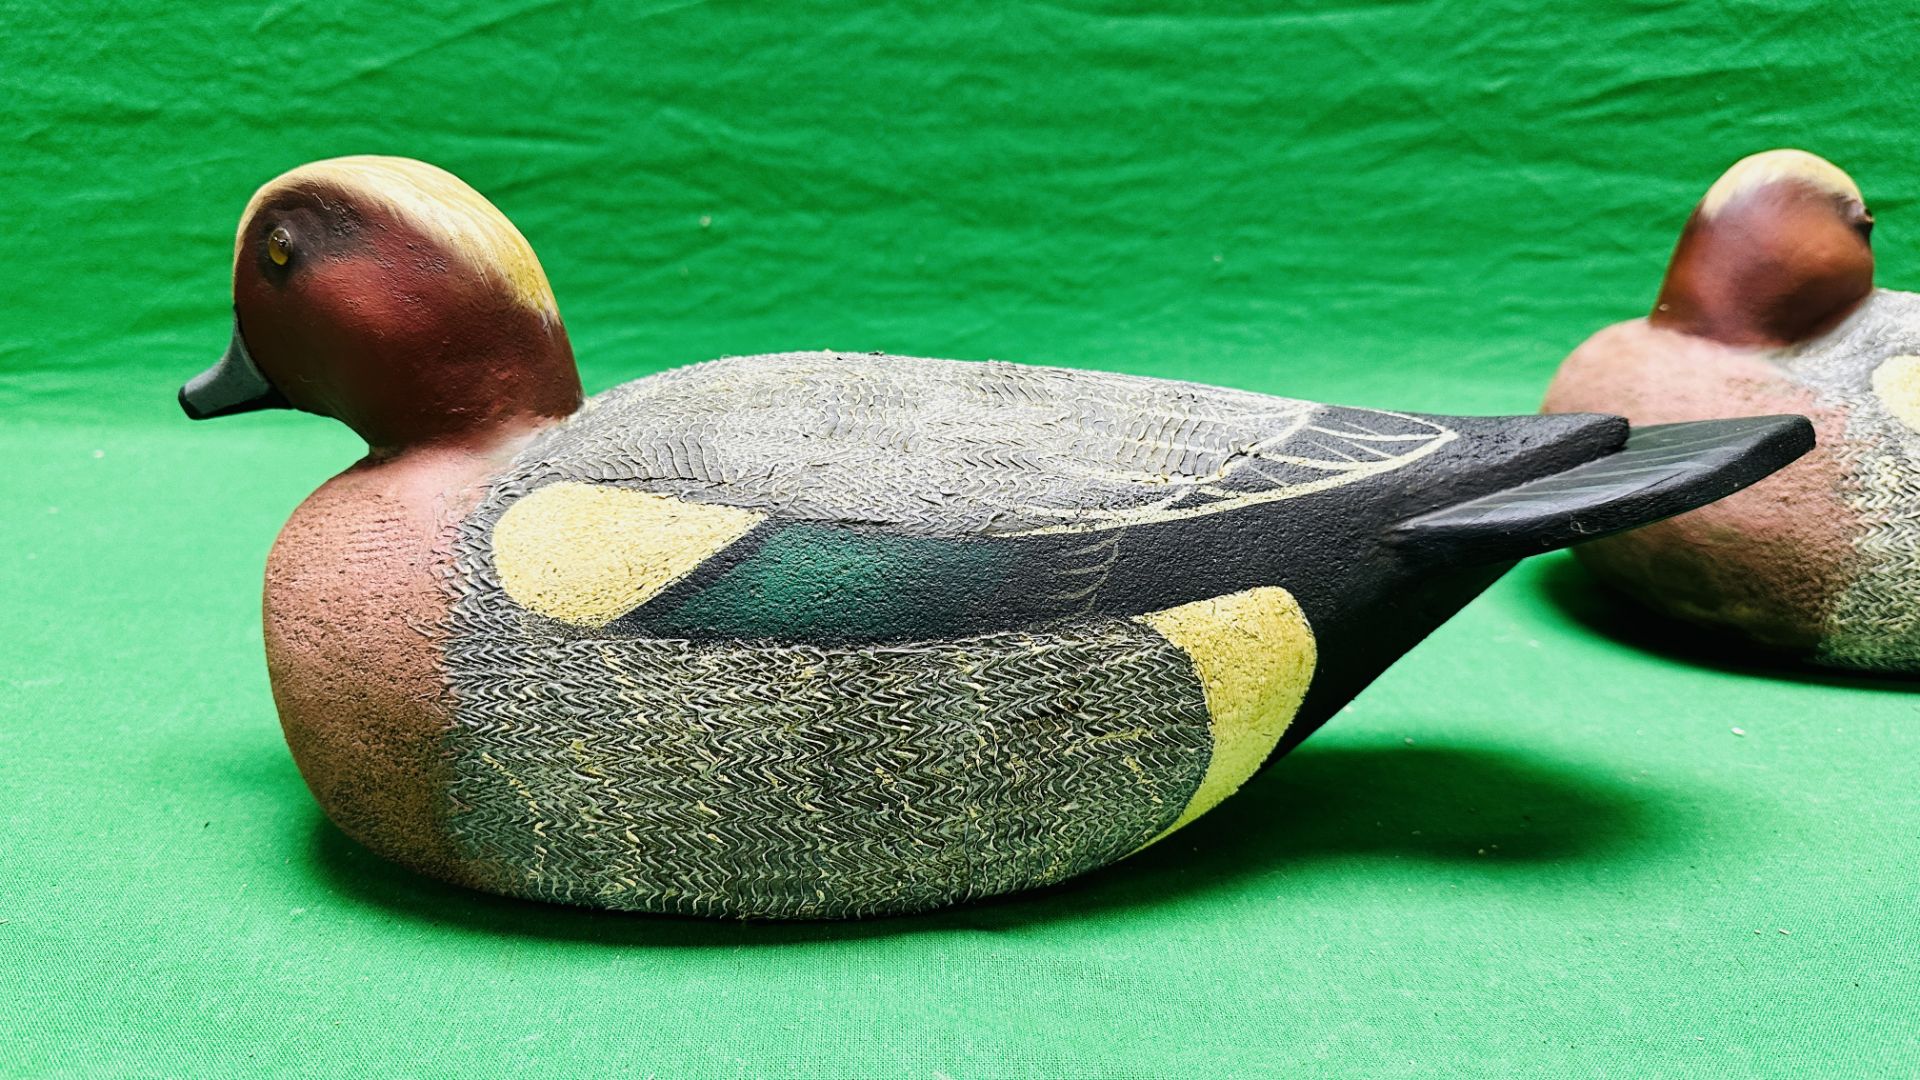 A HANDCRAFTED SET OF THREE DUCK DECOYS HAVING HANDPAINTED DETAIL AND GLASS EYES. - Image 5 of 8